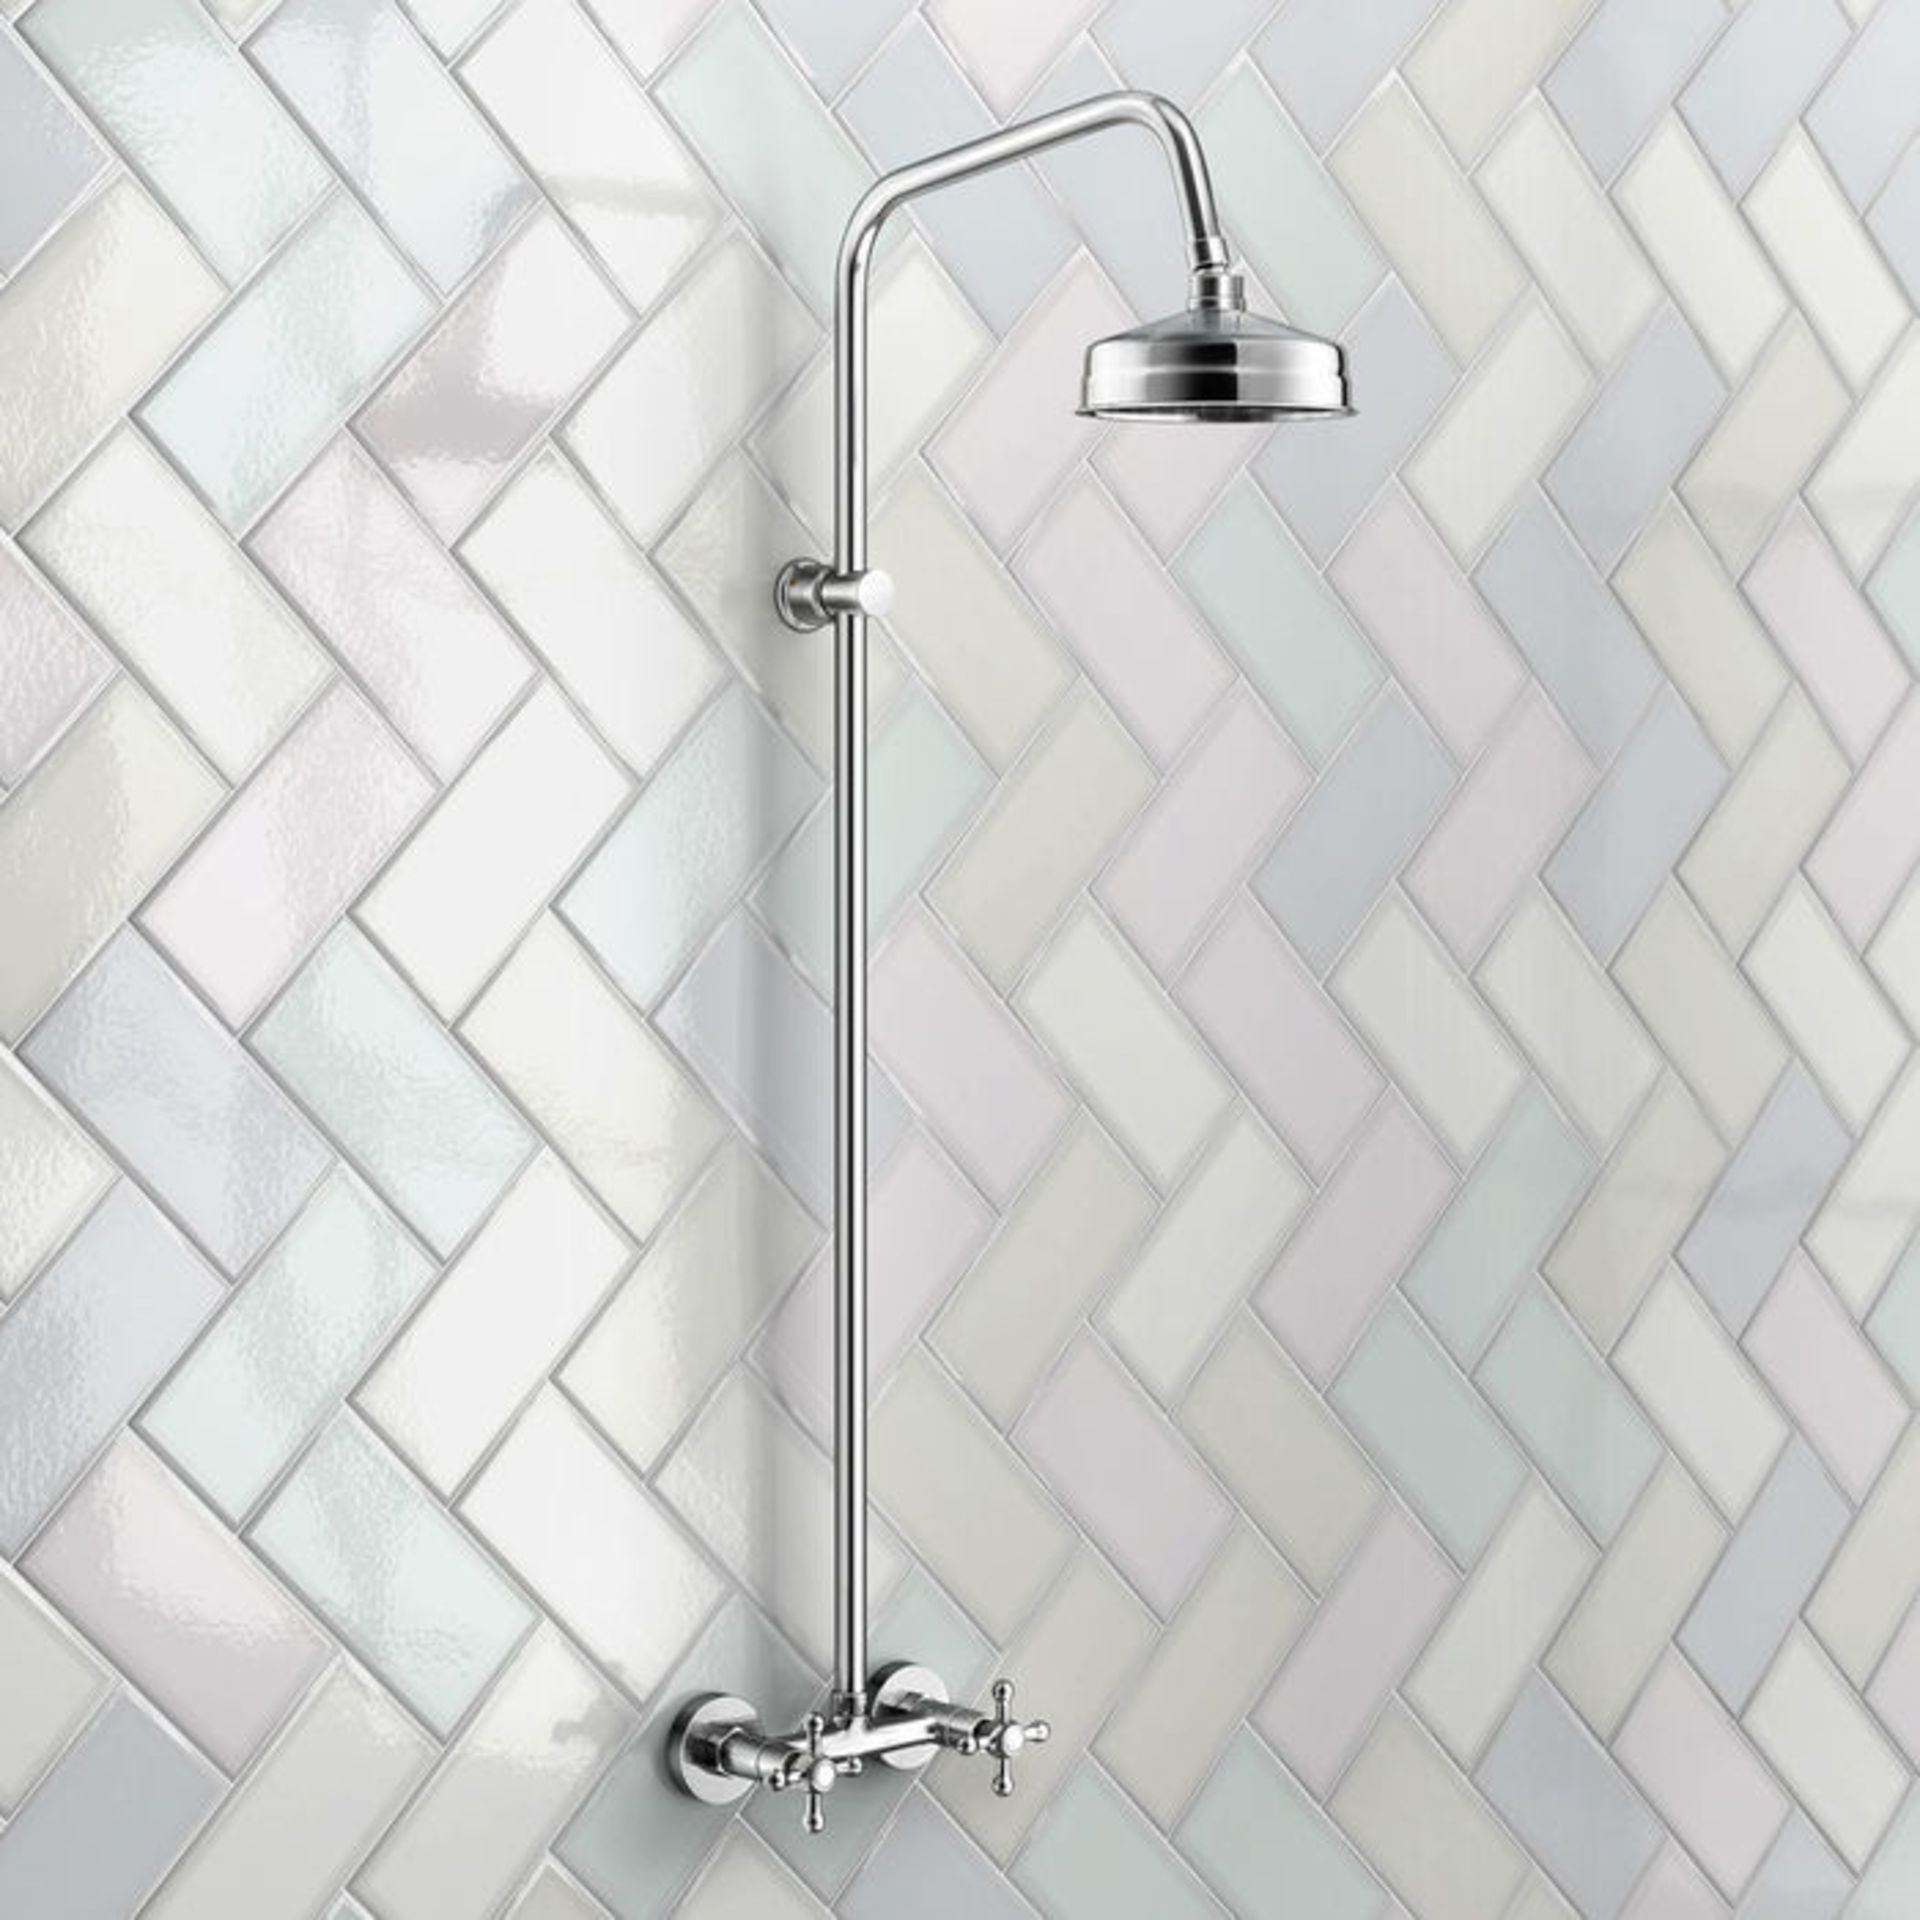 (CT193) Traditional Exposed Shower & Medium Head Exposed design makes for a statement piece Stunning - Bild 3 aus 3